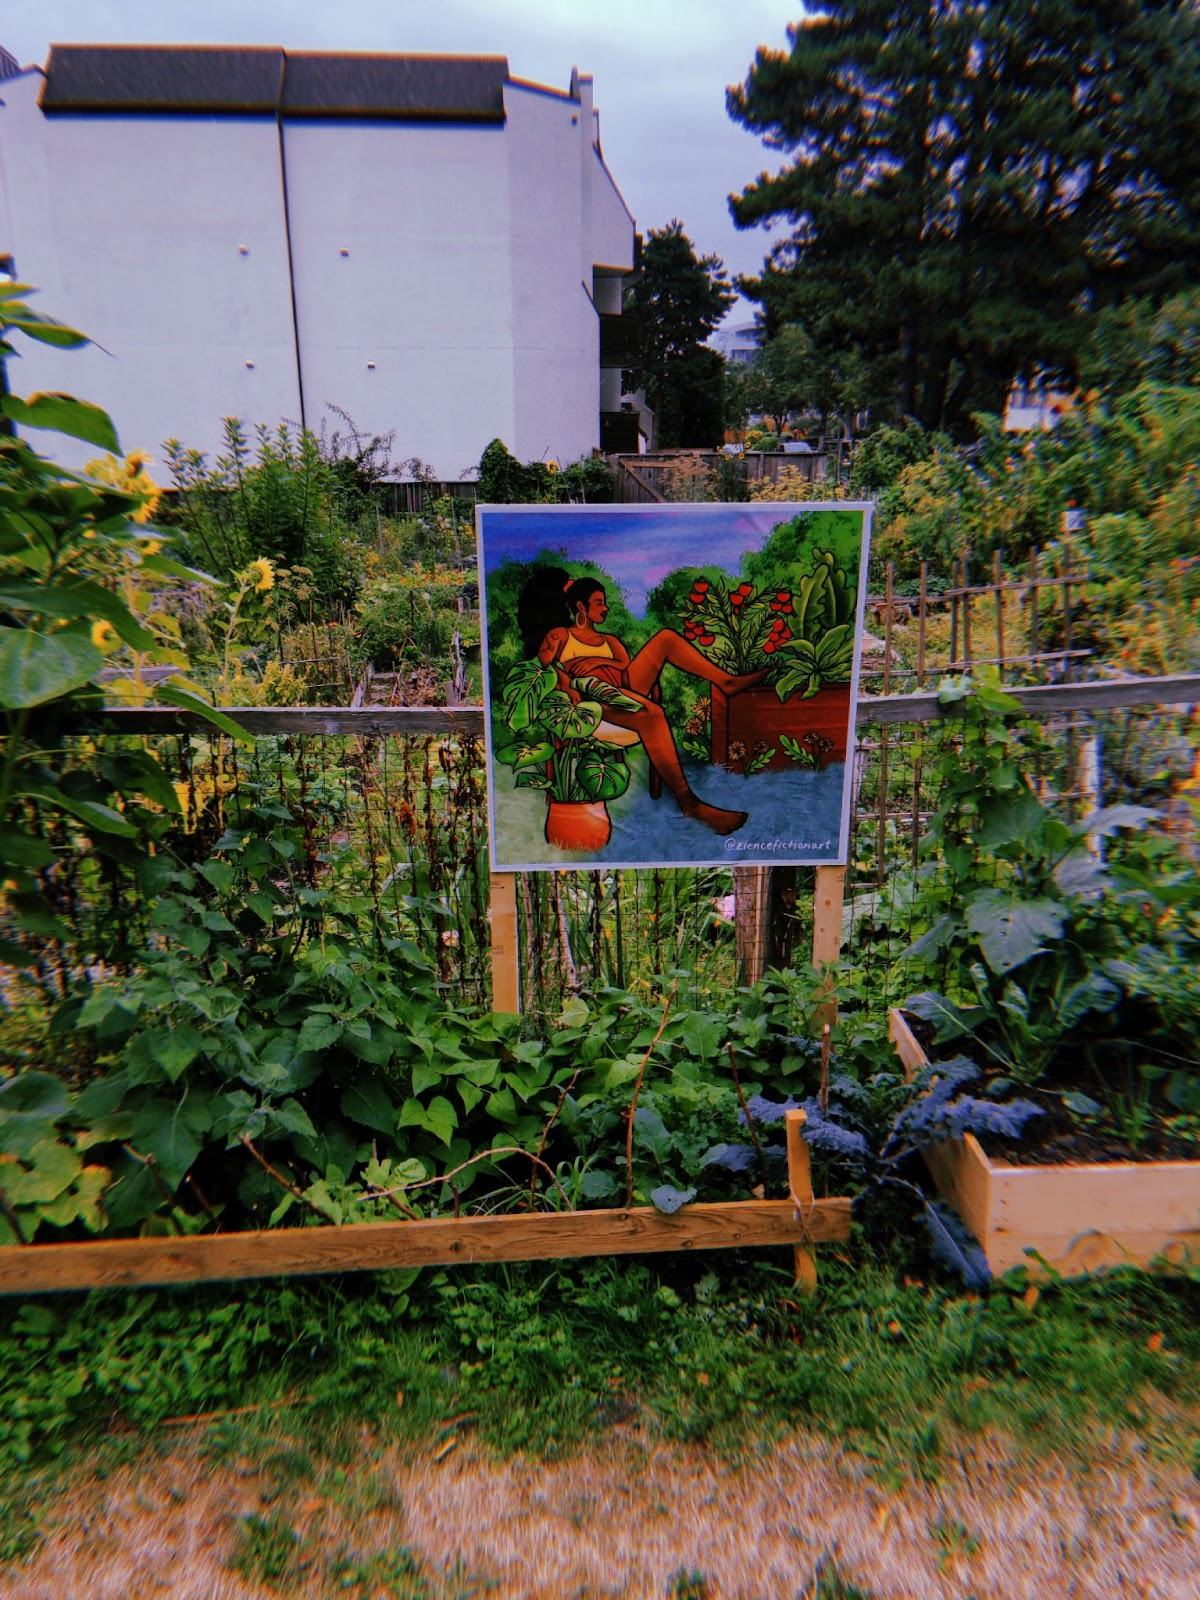 a painting of a person lounging in a garden, installed along the fence of a community garden